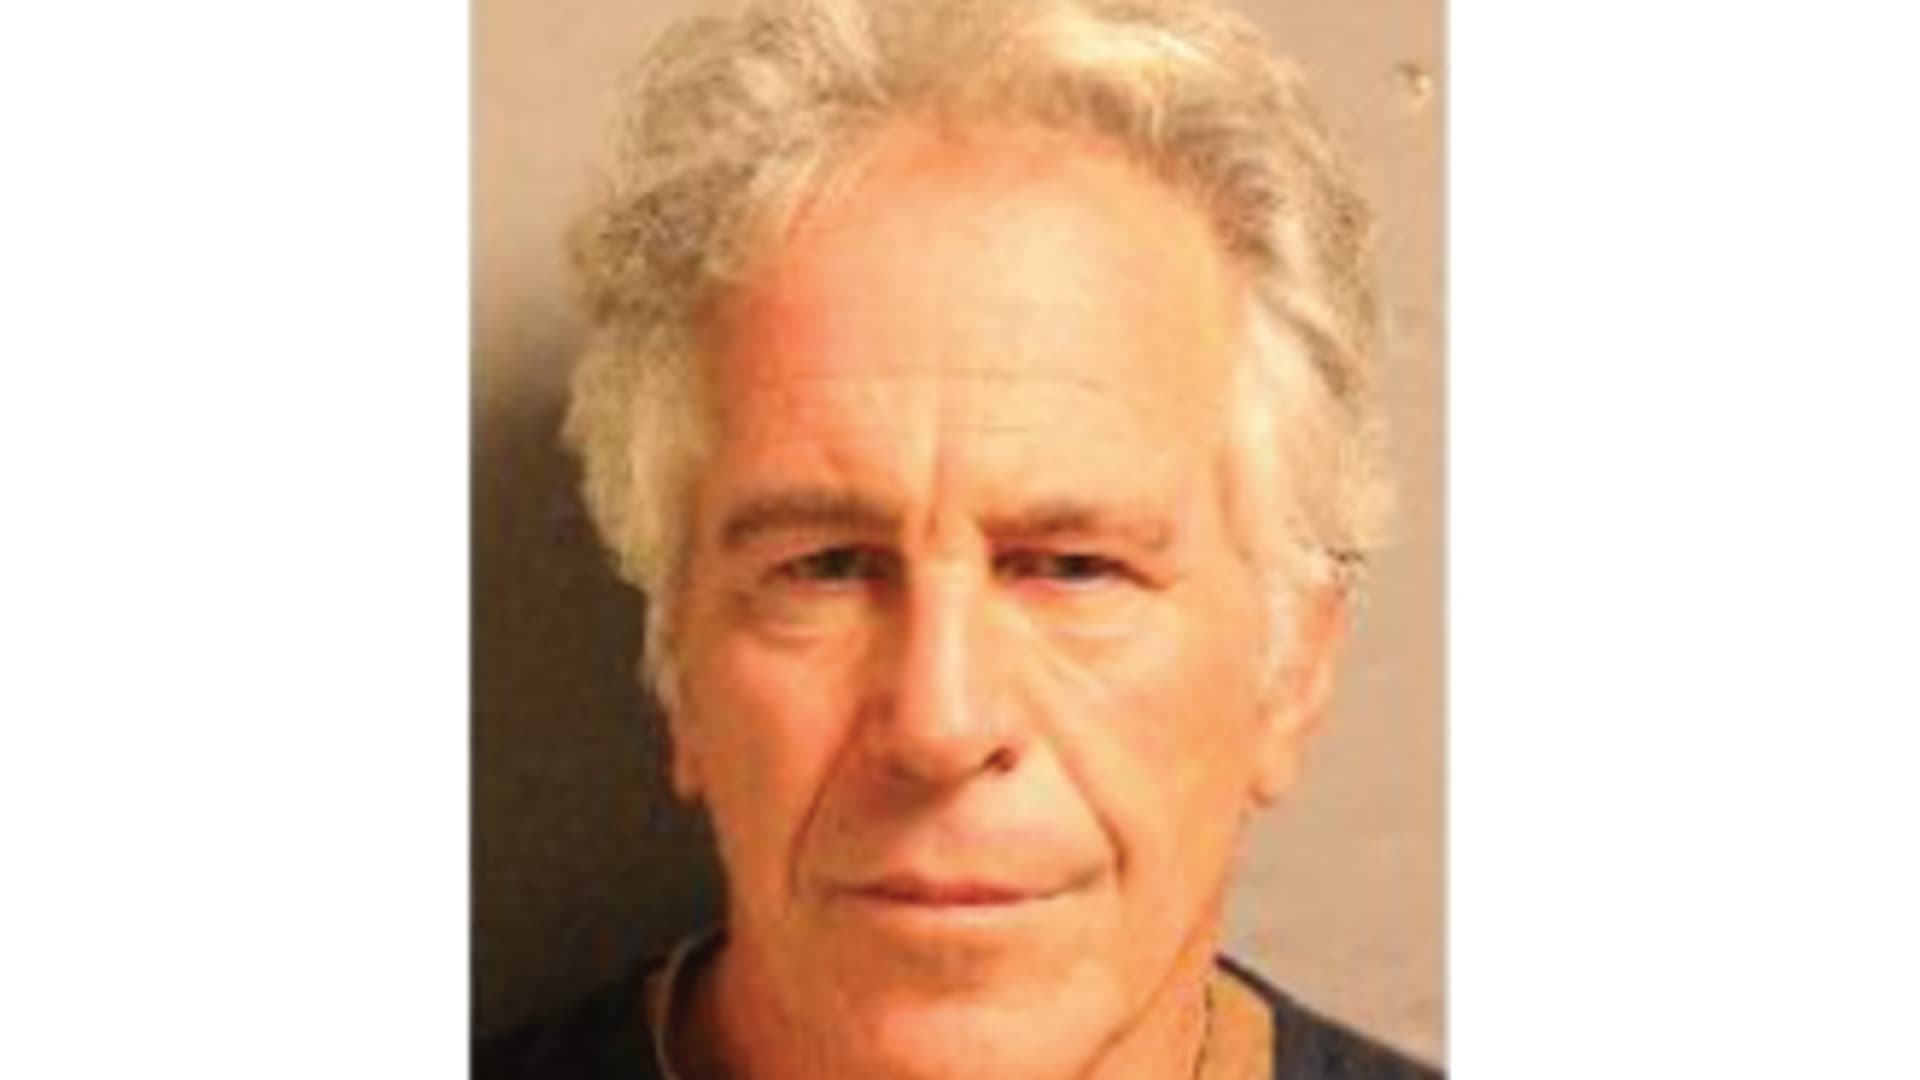 JPMorgan moved $1.1 million from Jeffrey Epstein to ‘women or girls’ after terminating client relationship, USVI alleges